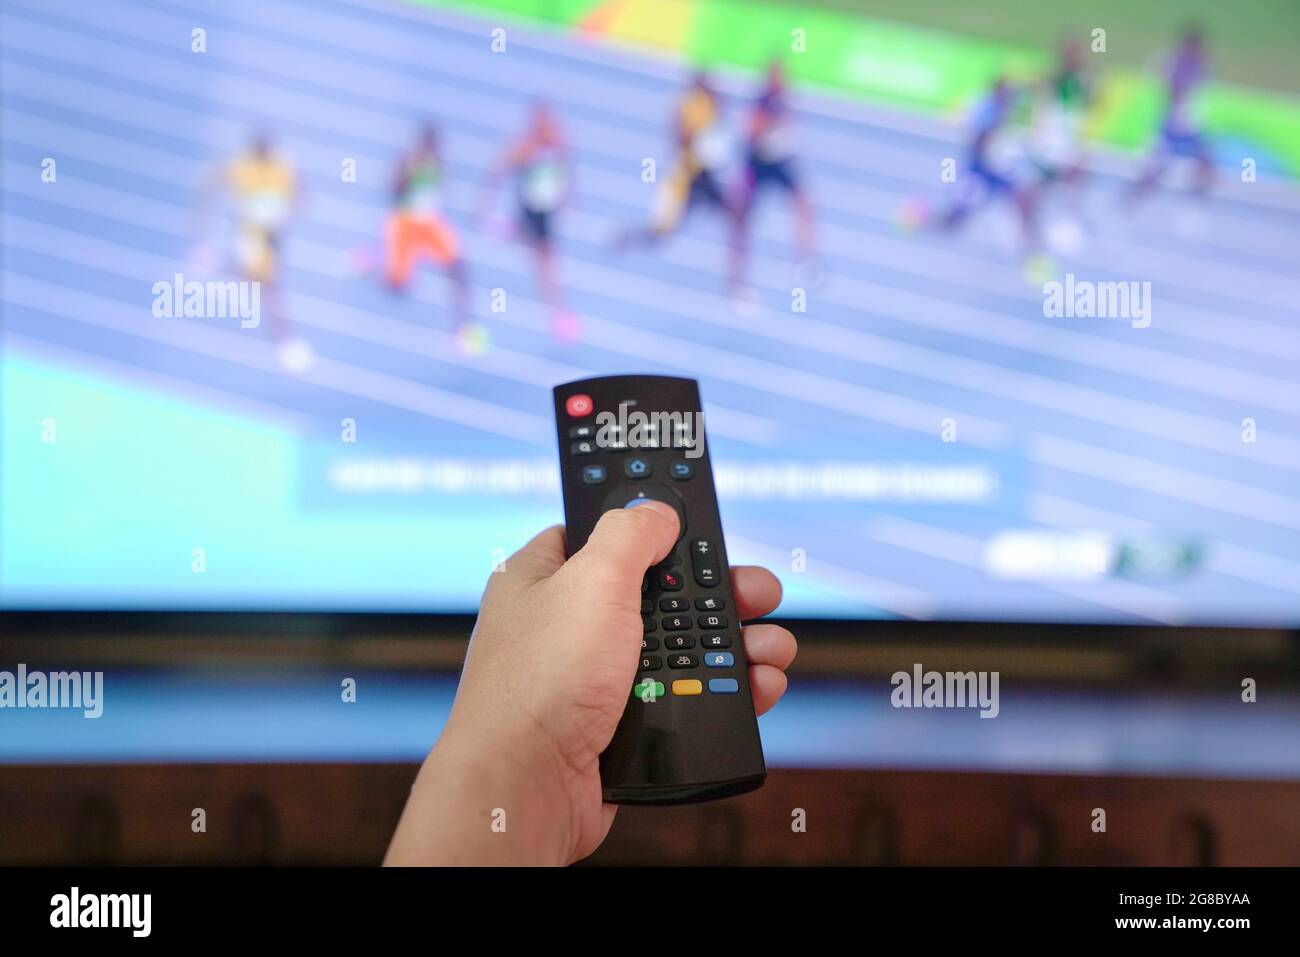 Watching sports track and field program on tv. Close up on remote control. Stock Photo